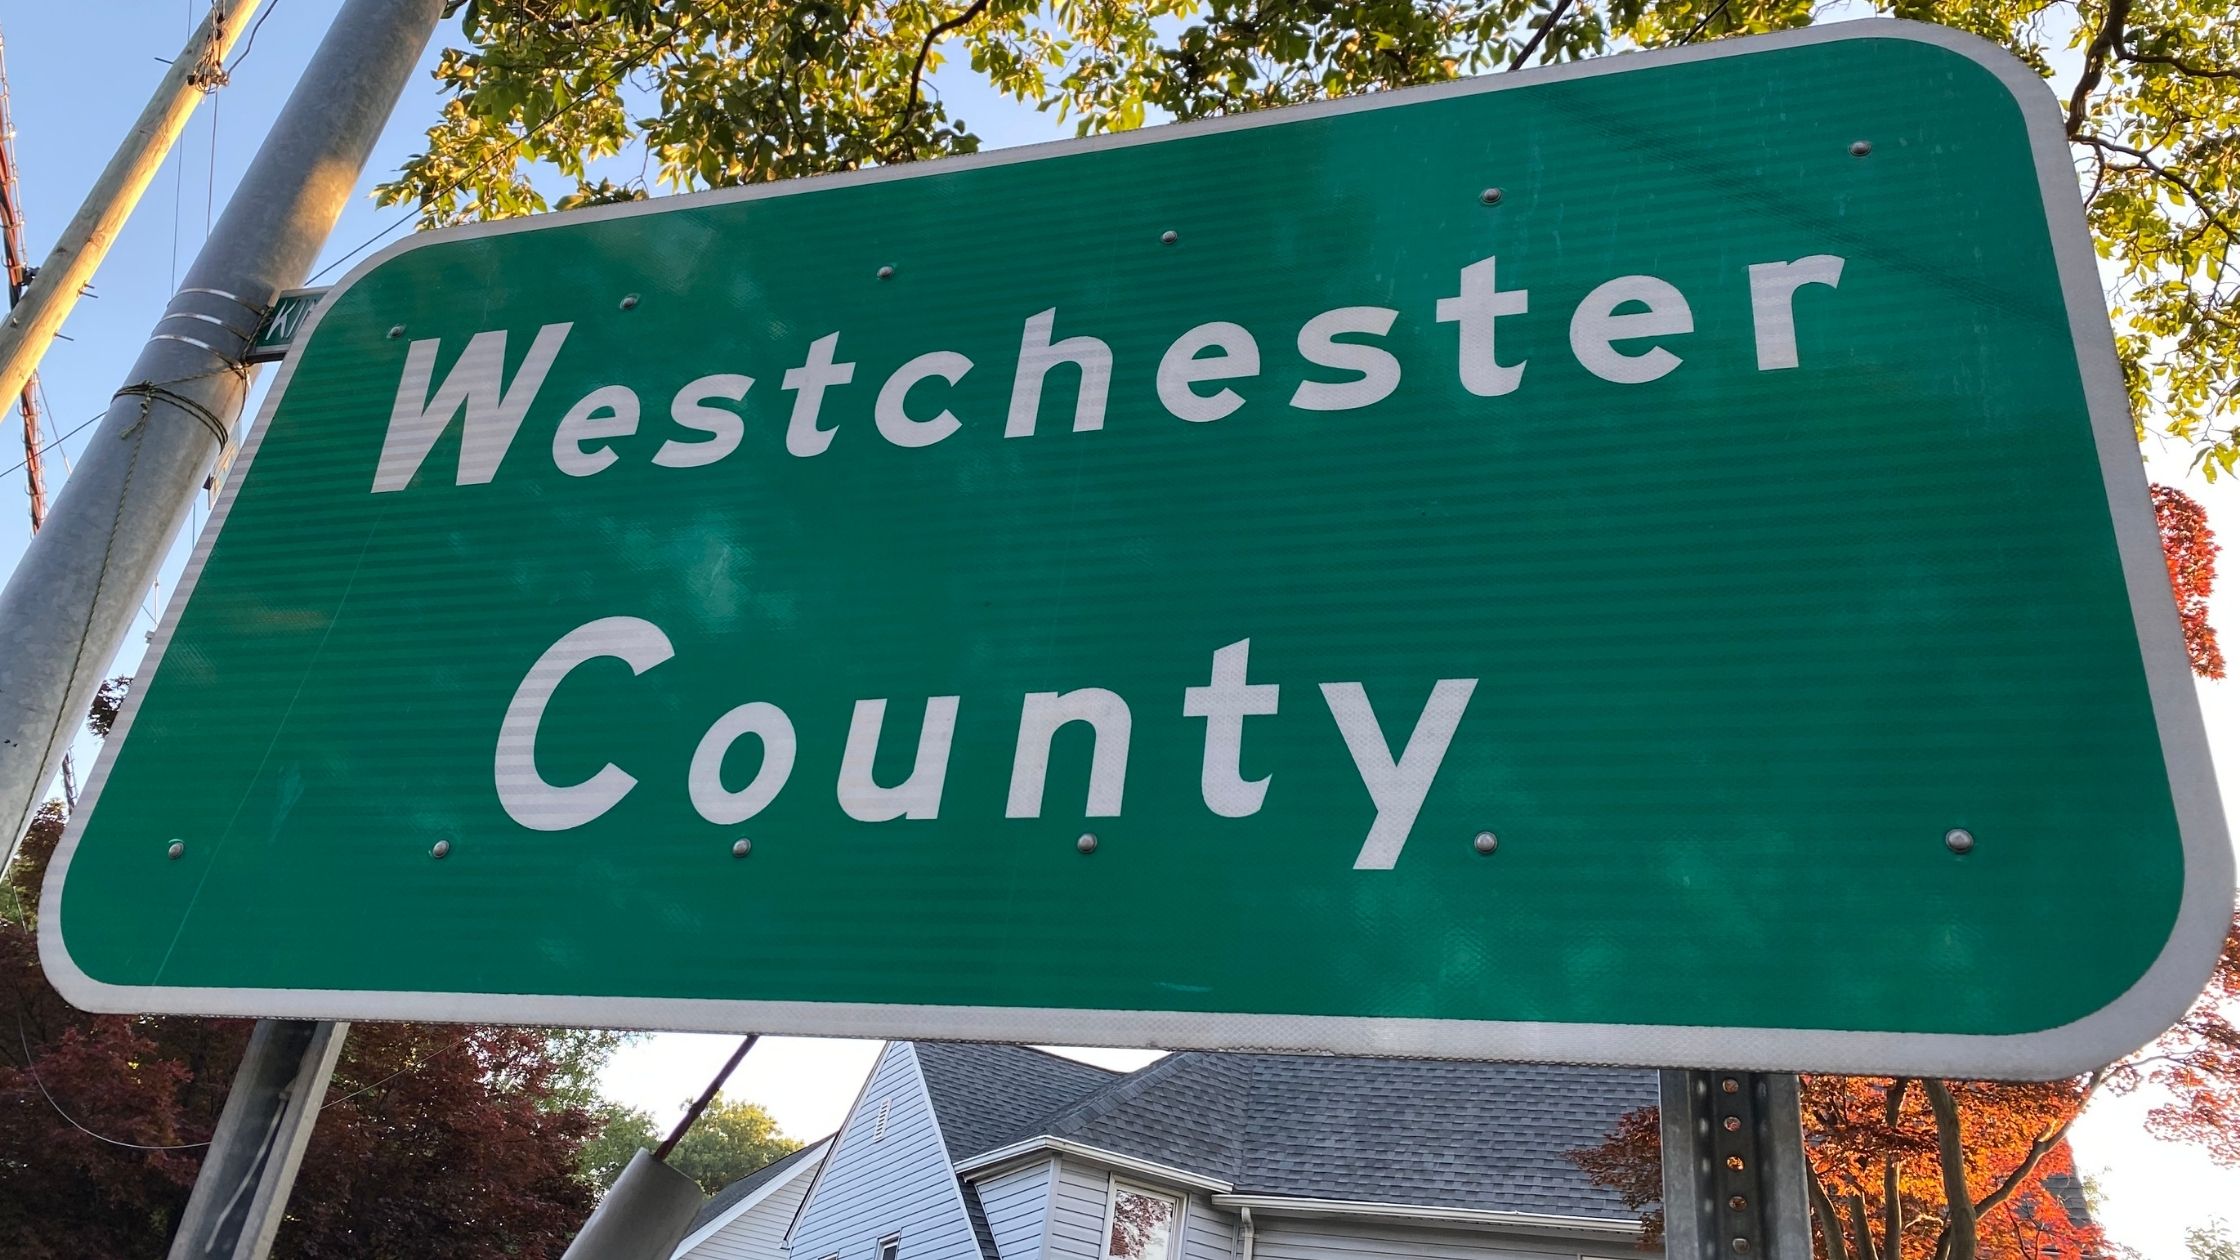 Road sign for Westchester County NY